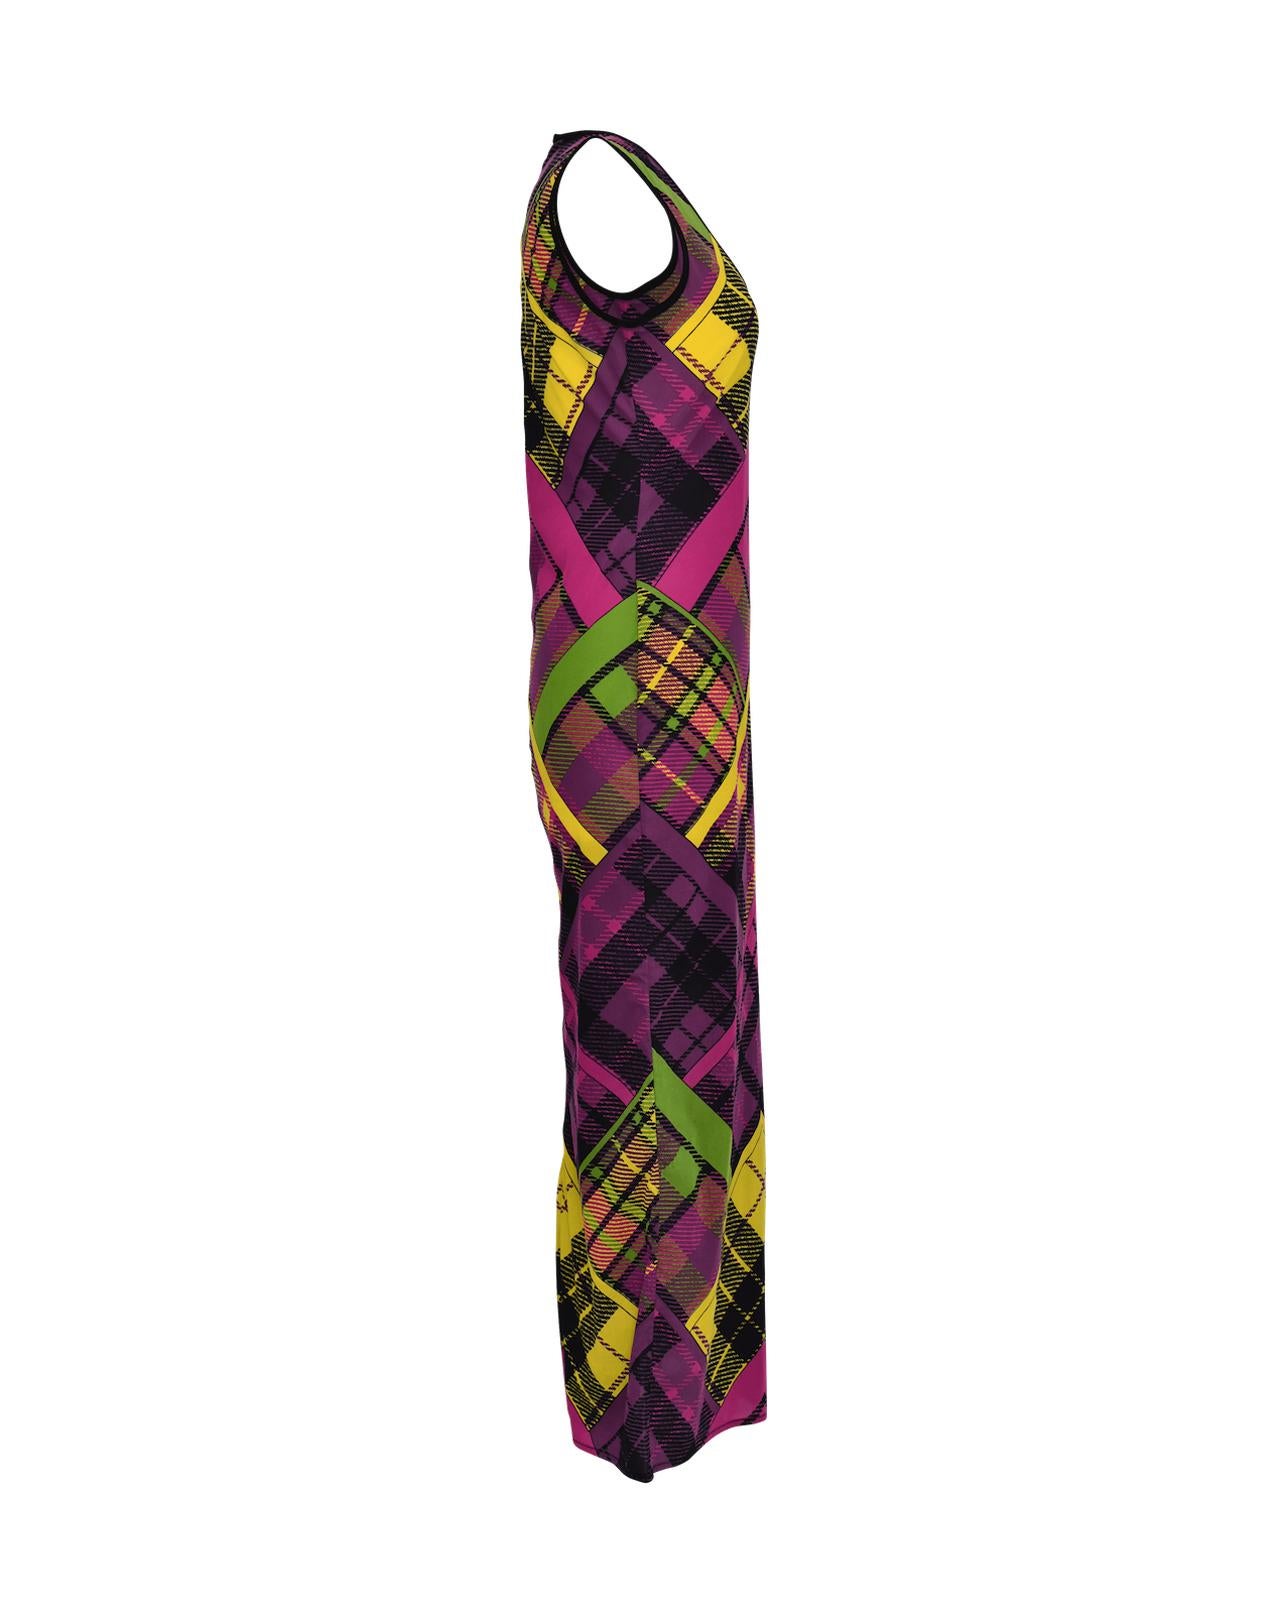 A/W 1992 Gianni Versace Plaid Wiggle Dress In Good Condition For Sale In North Hollywood, CA